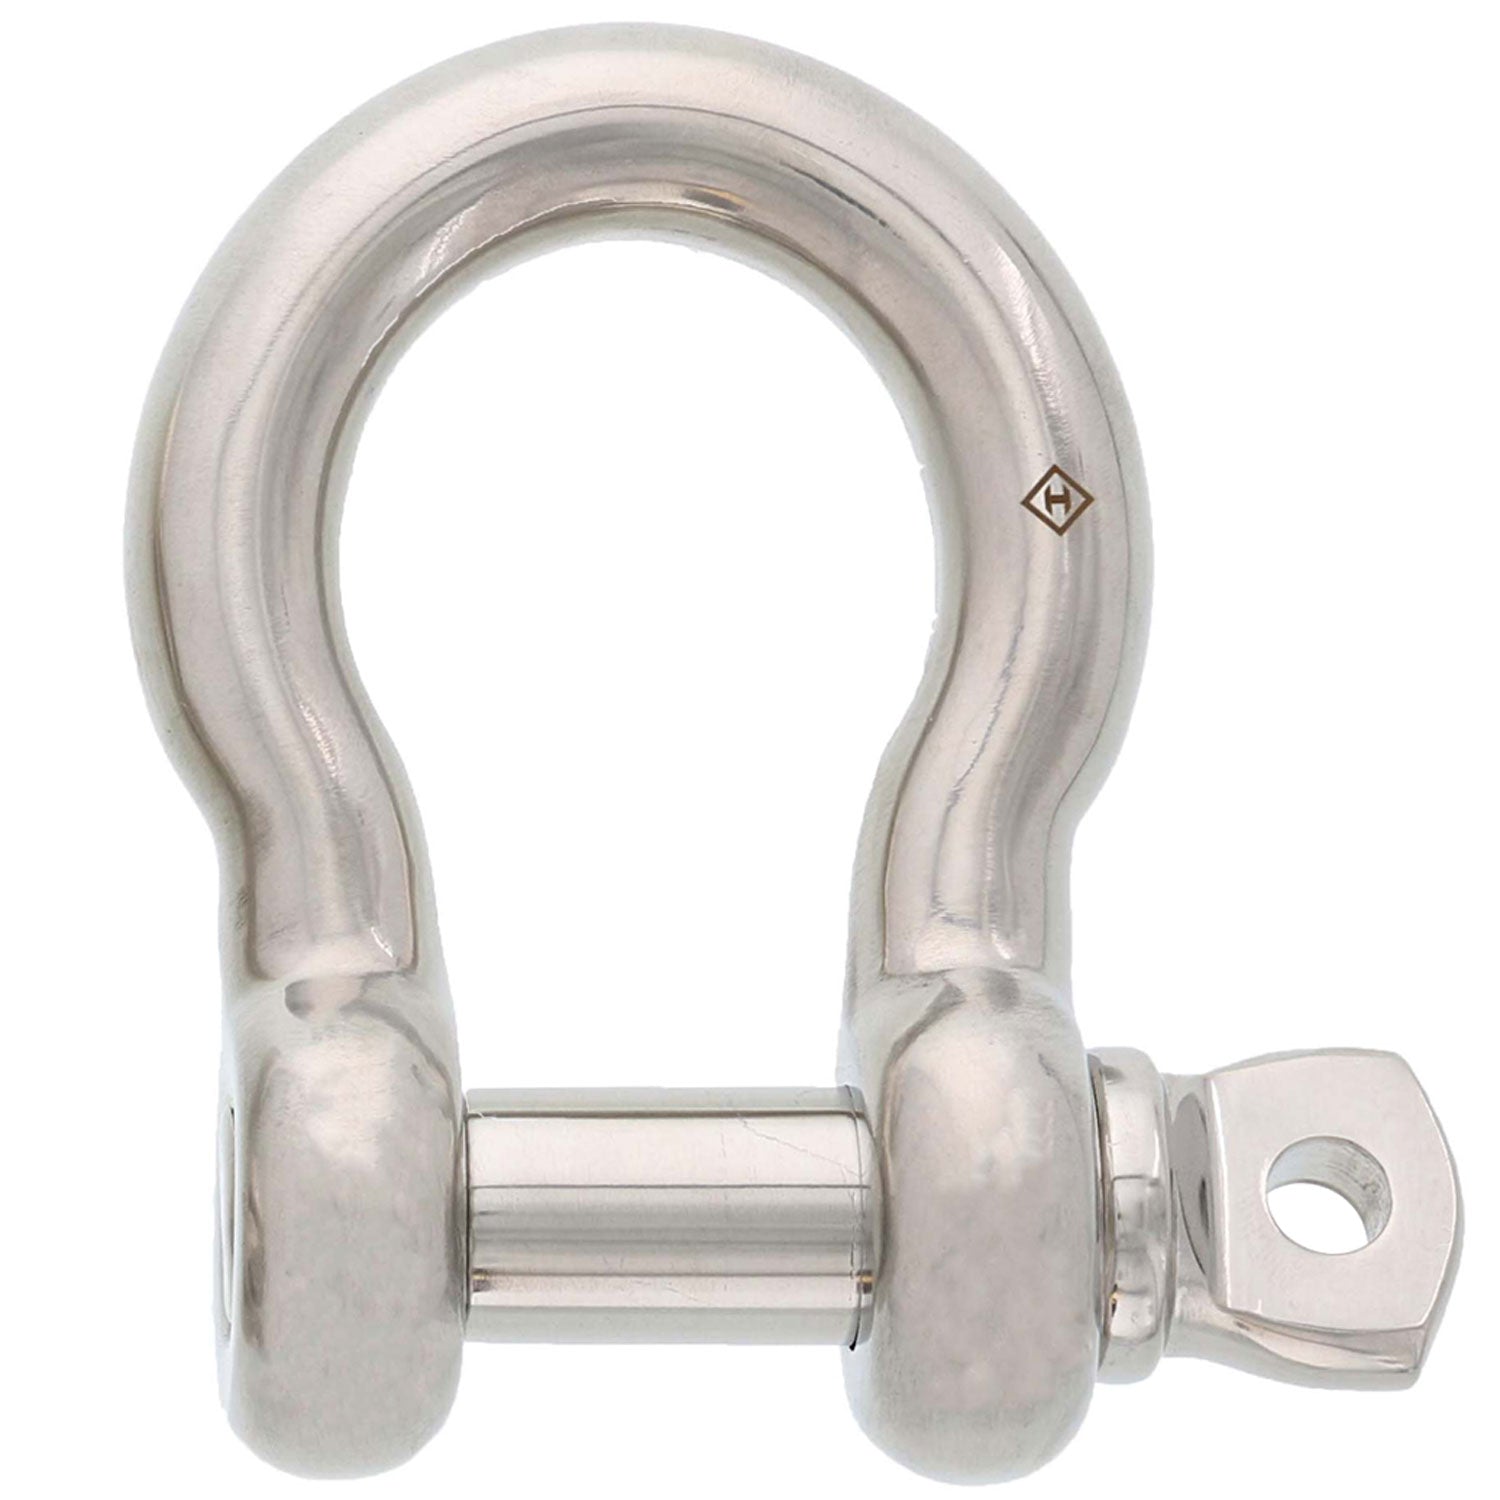 3/4 in., 8304 lb, Type 316 Stainless Steel Screw Pin Anchor Shackle